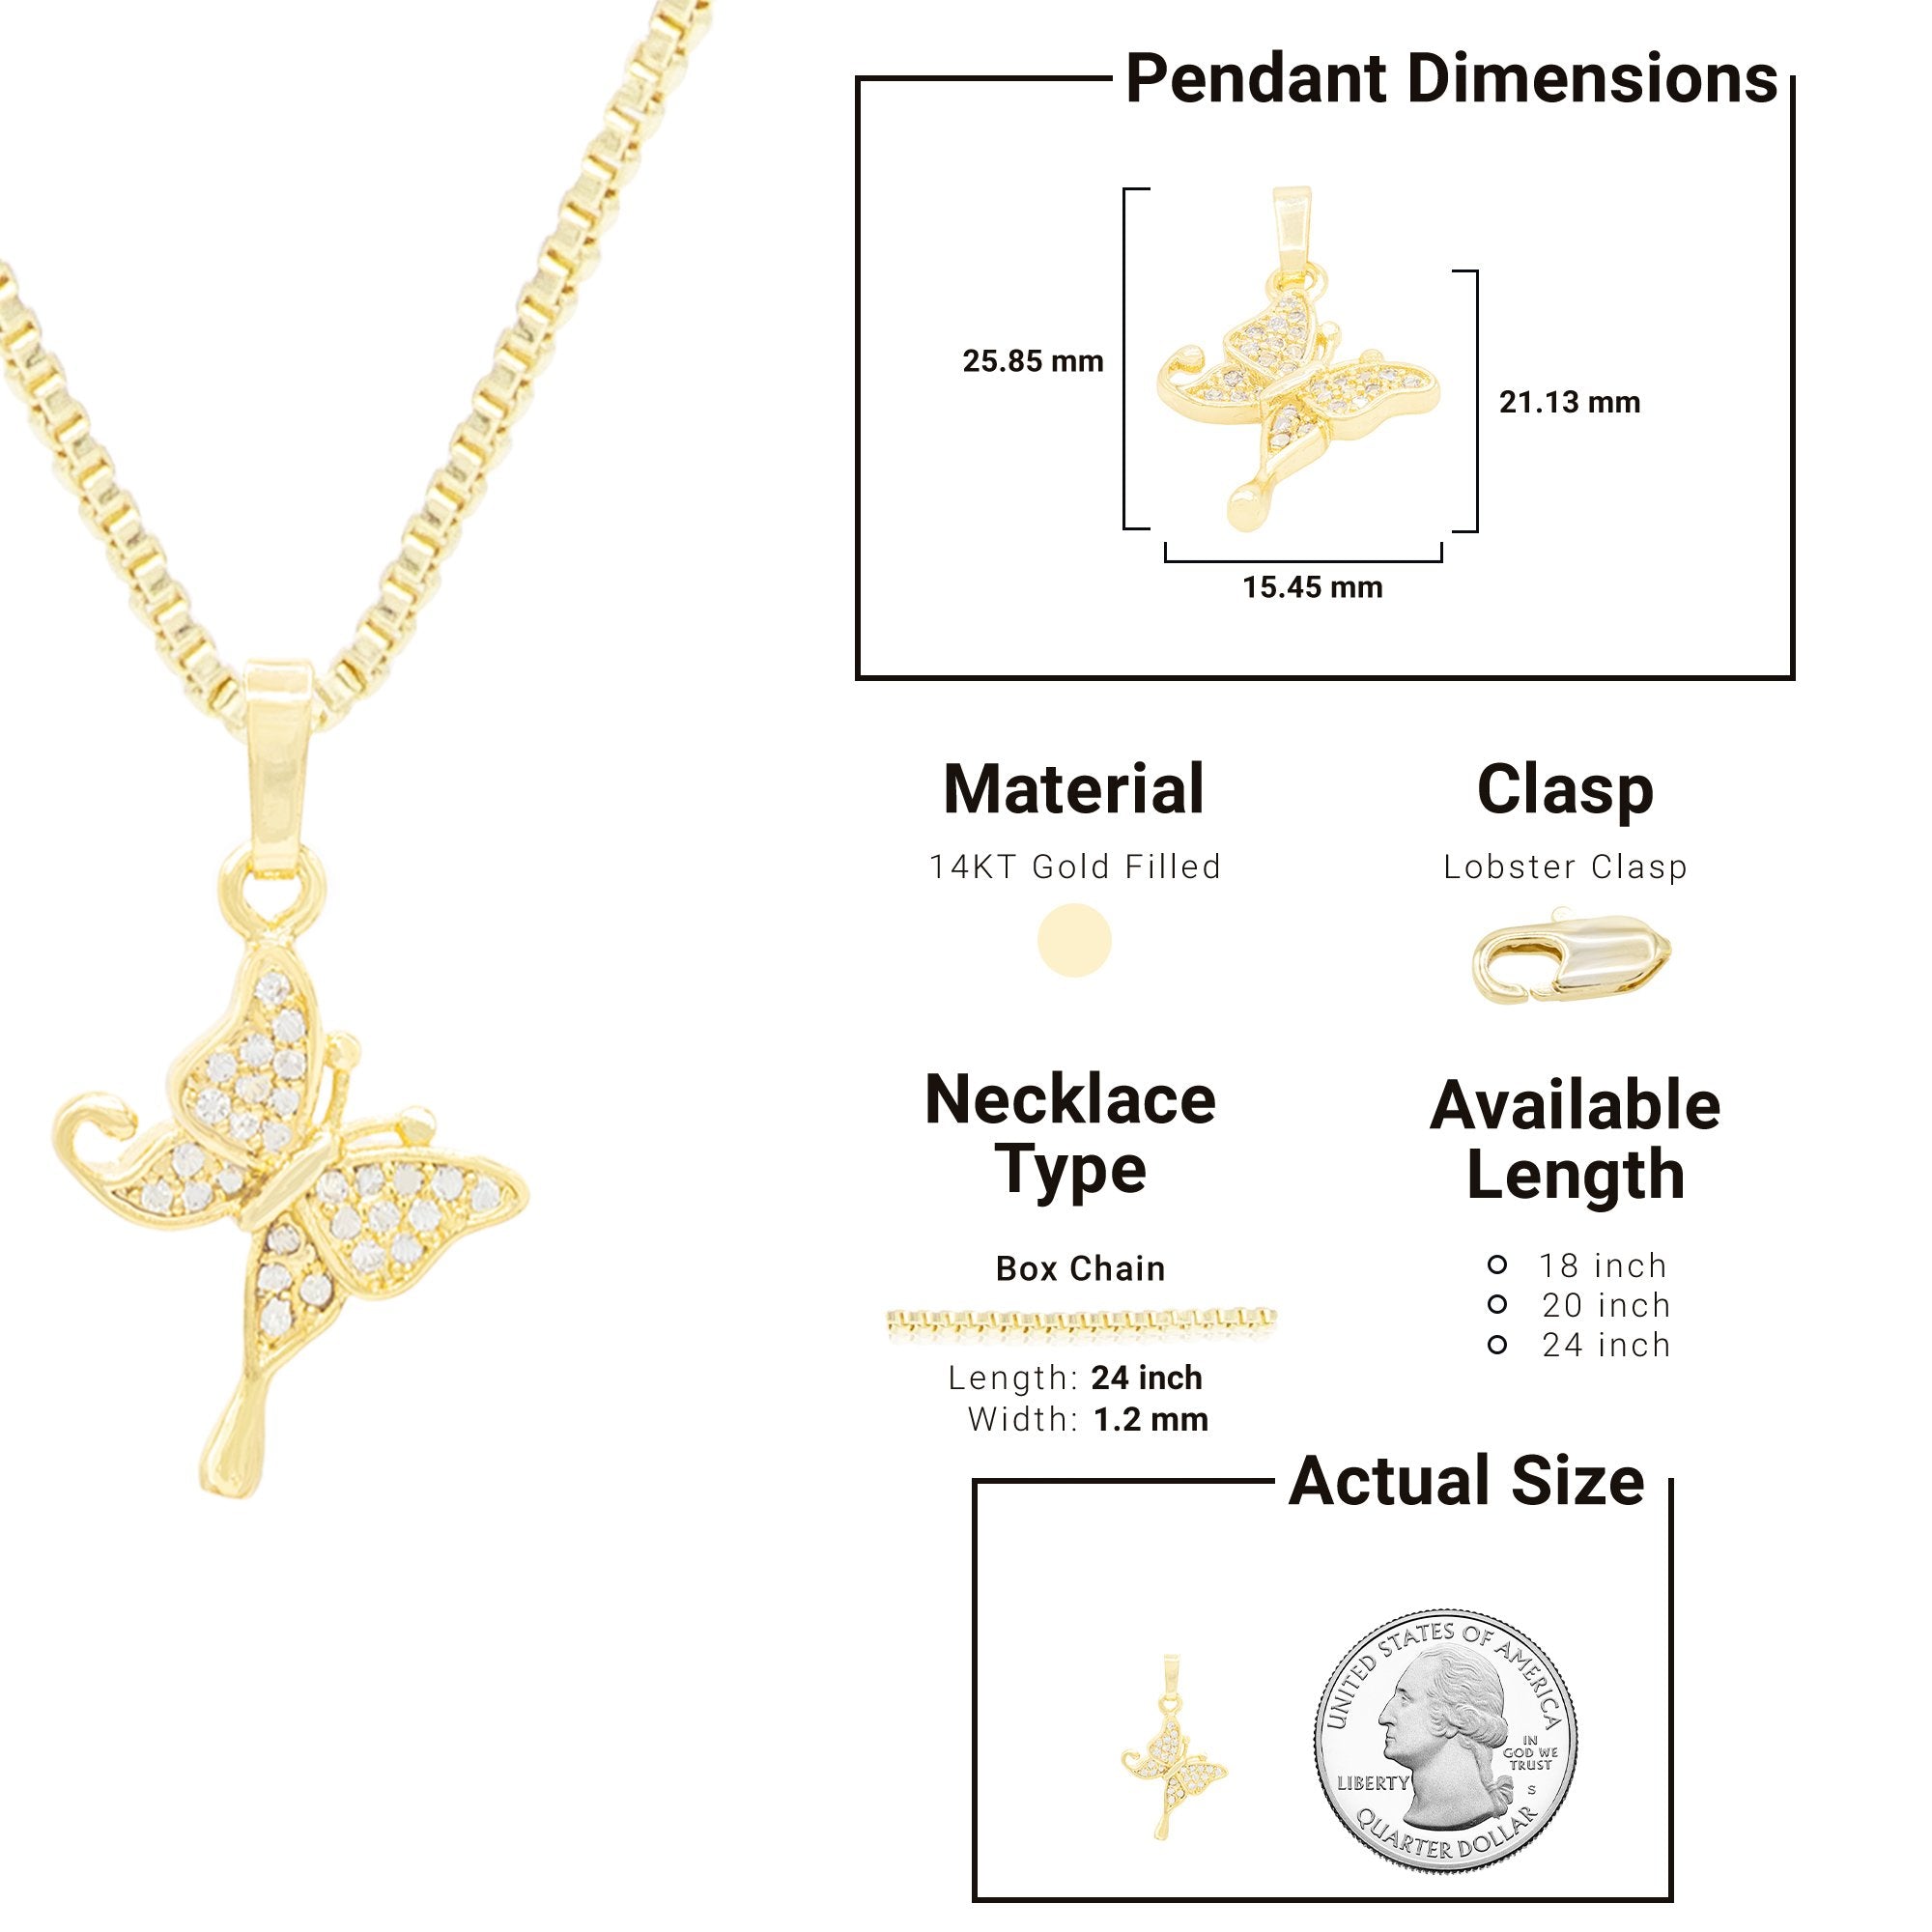 Hanging Butterfly Cubic Zirconia Pendant With Necklace Set 14K Gold Filled